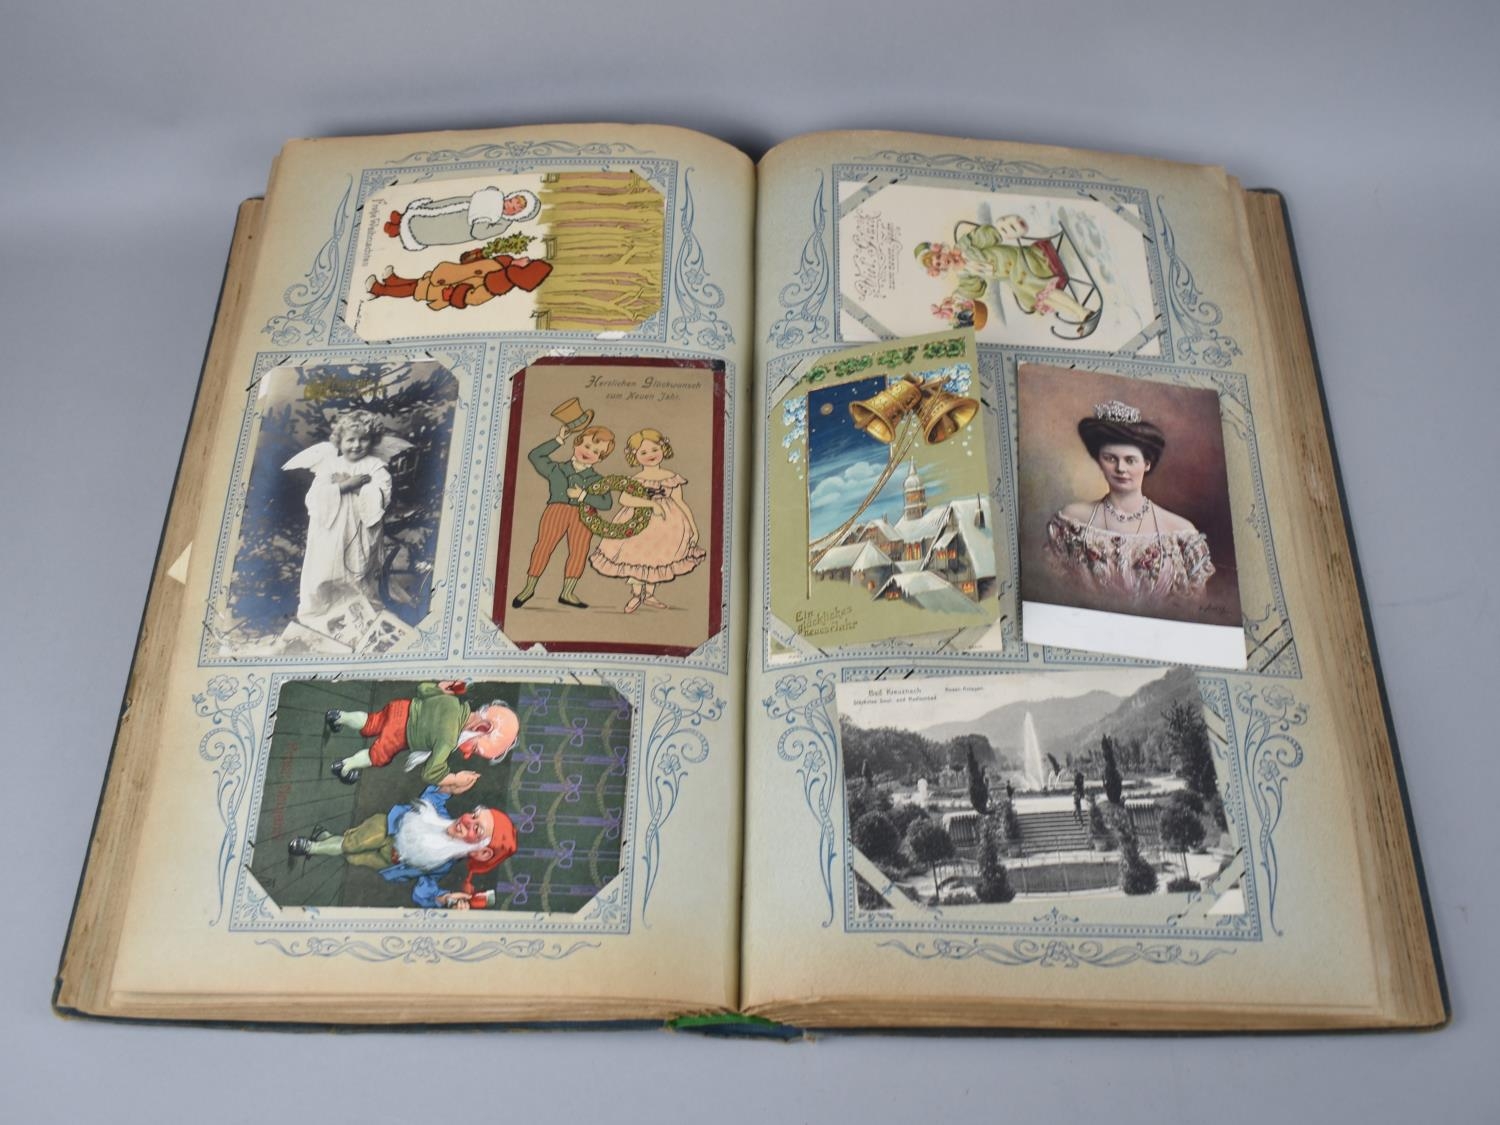 A Large Edwardian German Postcard Album Containing Large Quantity of Coloured and Monochrome Mixed - Image 5 of 8